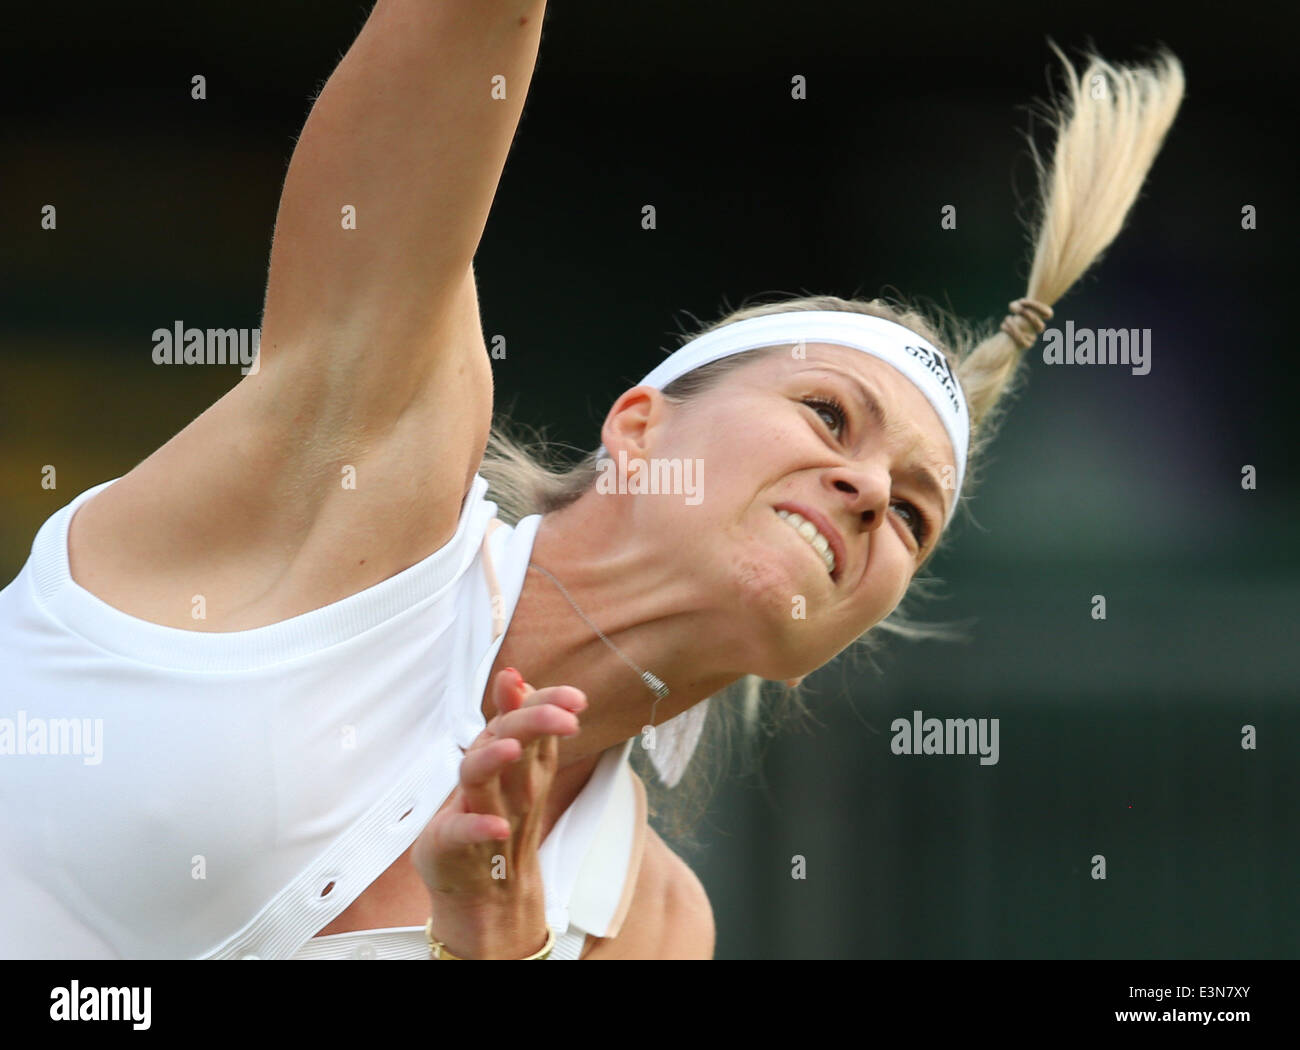 London, Britain. 25th June, 2014. Maria Kirilenko of Russia serves during the women's singles second round match against Peng Shuai of China at the 2014 Wimbledon Championships in Wimbledon, southwest London, Britain, on June 25, 2014. Peng Shuai won 2-0. Credit:  Meng Yongmin/Xinhua/Alamy Live News Stock Photo